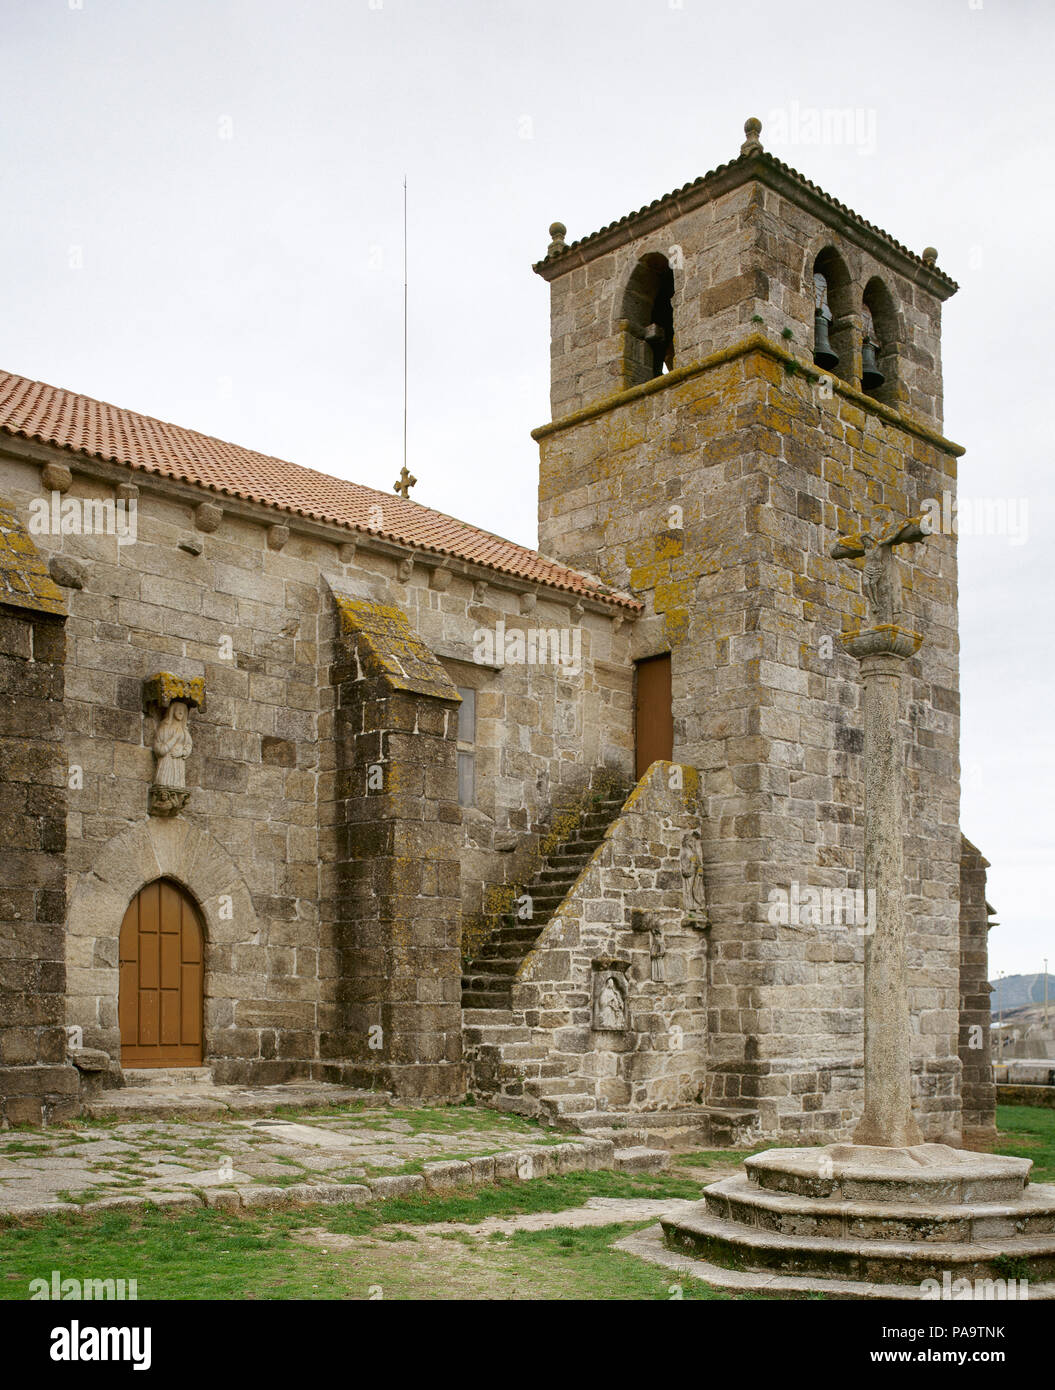 Ponteceso, La Coruña province, Galicia, Spain. The church of Santa Maria da Atalaia. It was built at the end of 14th century in Gothic sailor style, by Dame Urraca de Moscoro by express wish of his mother Dame Juana de Castro and Lara. Bell tower and calvary stone. Stock Photo